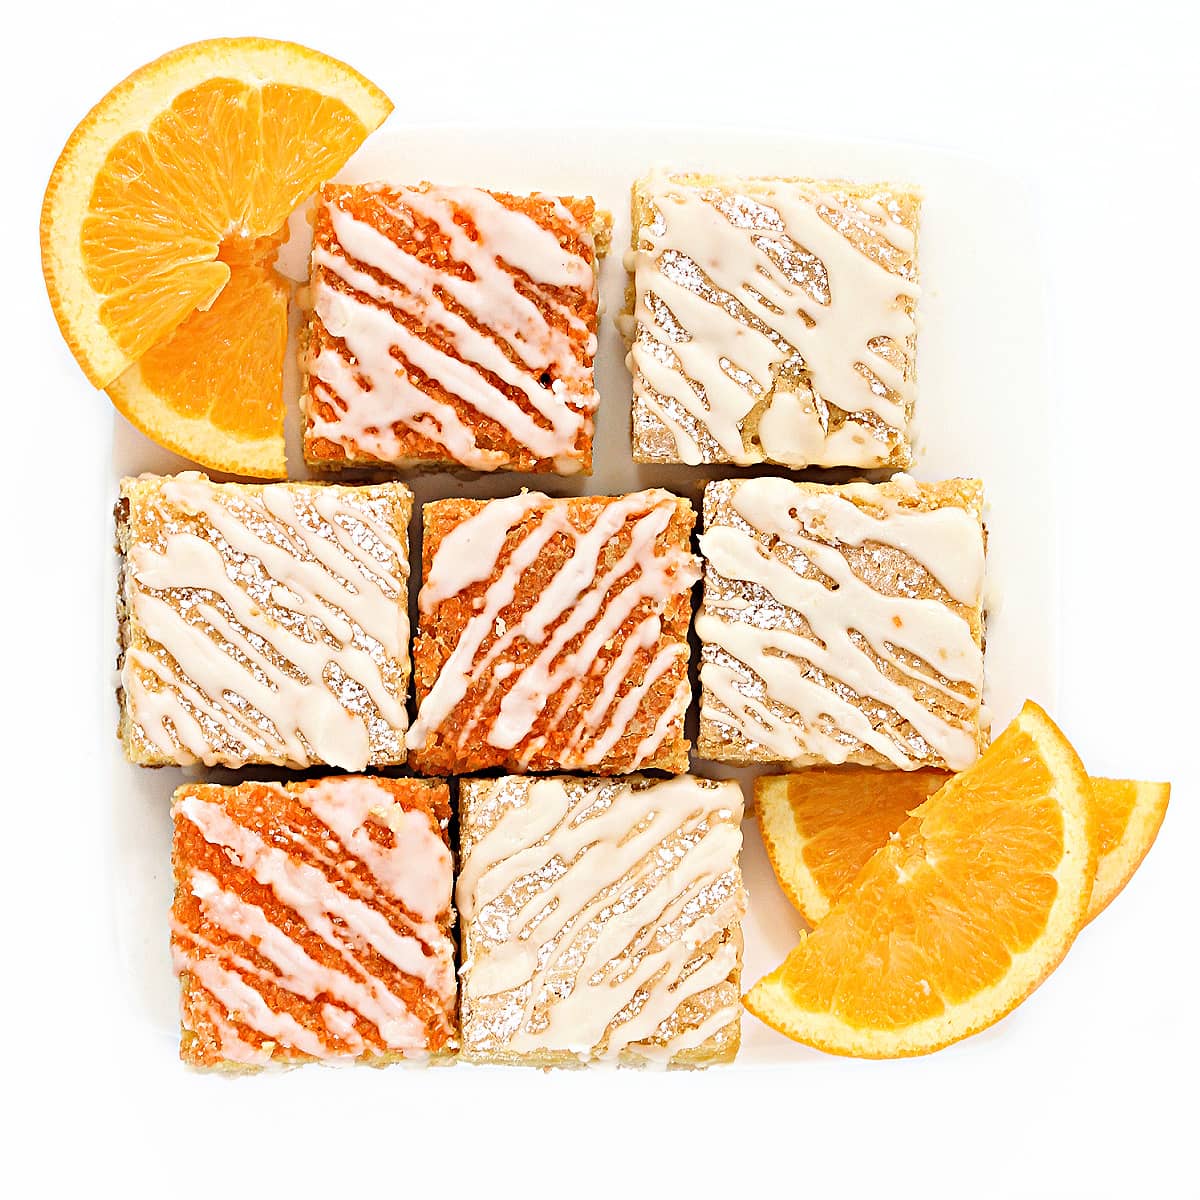 Overhead image of plated orange bars drizzled with icing.